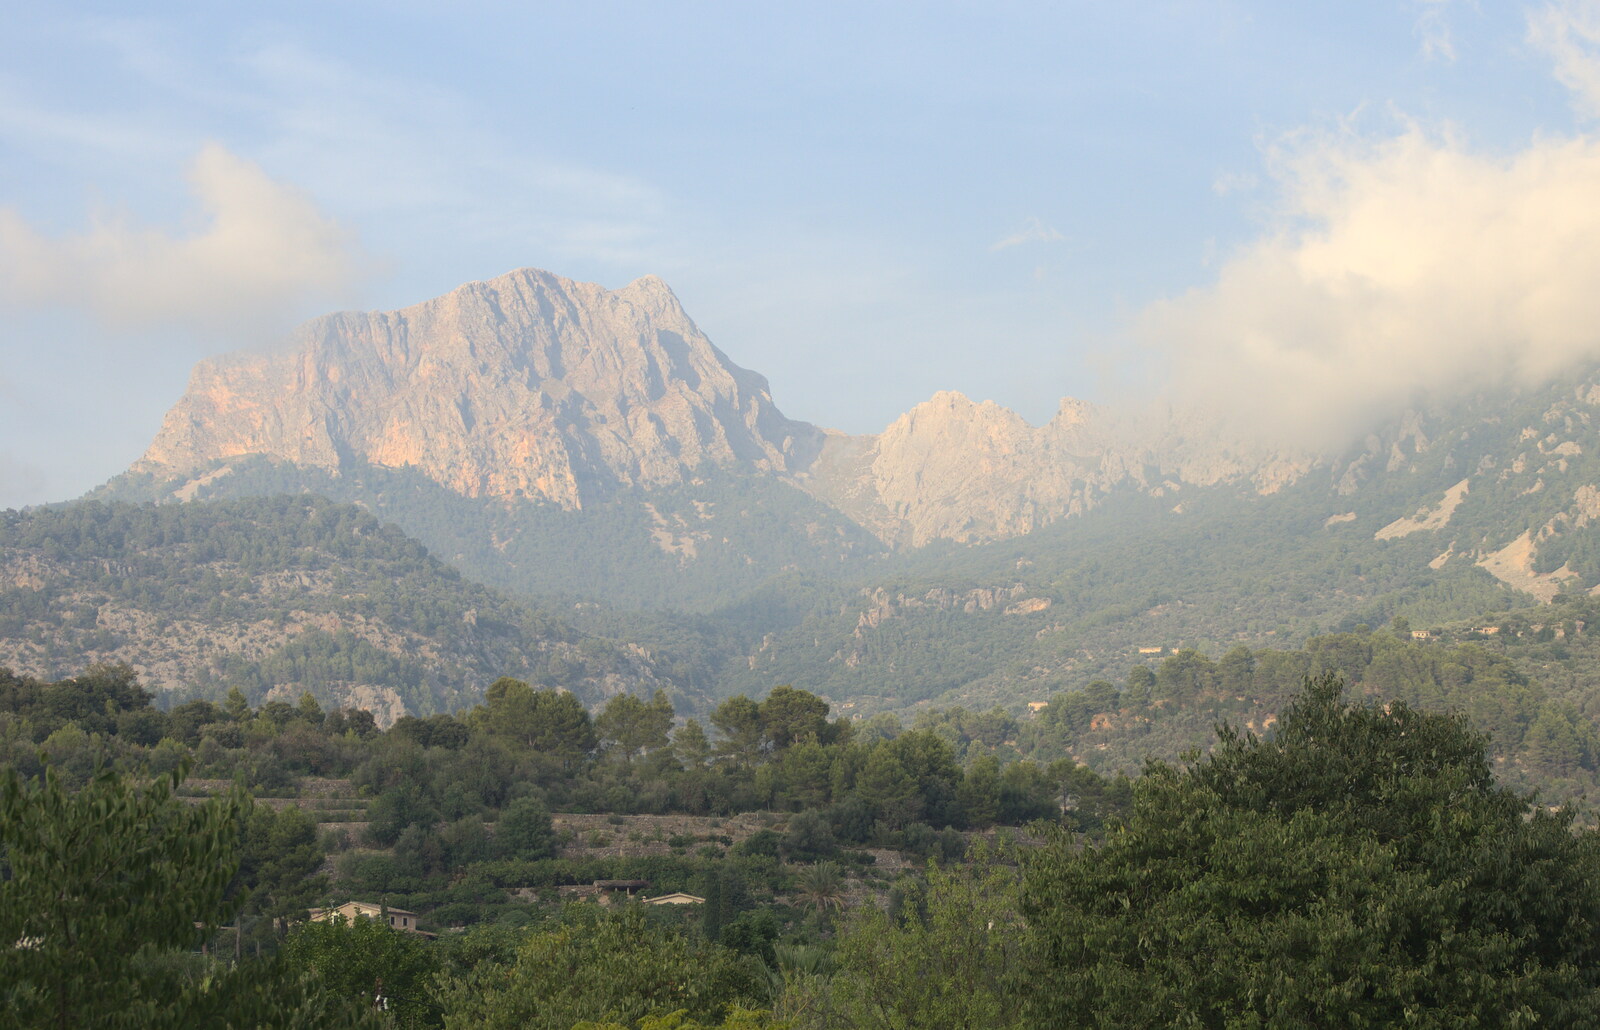 The cloud-topped mountains of Mallorca from A Trip to Sóller, Mallorca, Spain - 8th-14th September 2012